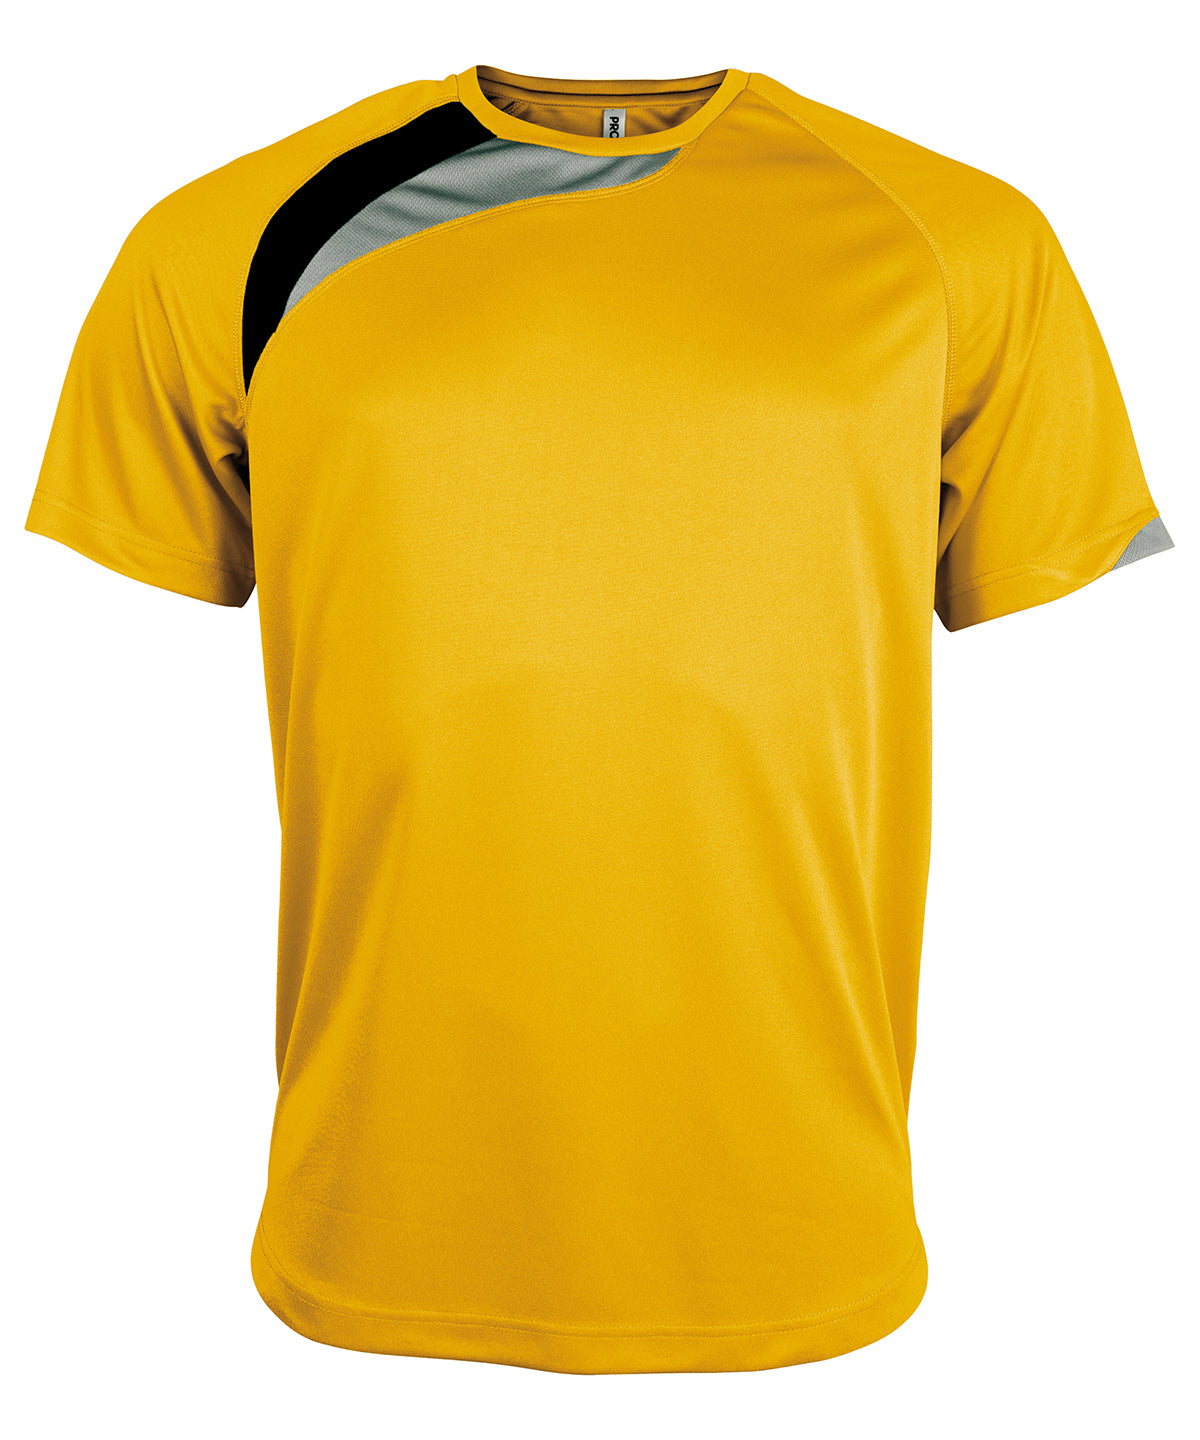 short-sleeved jersey - COOZO